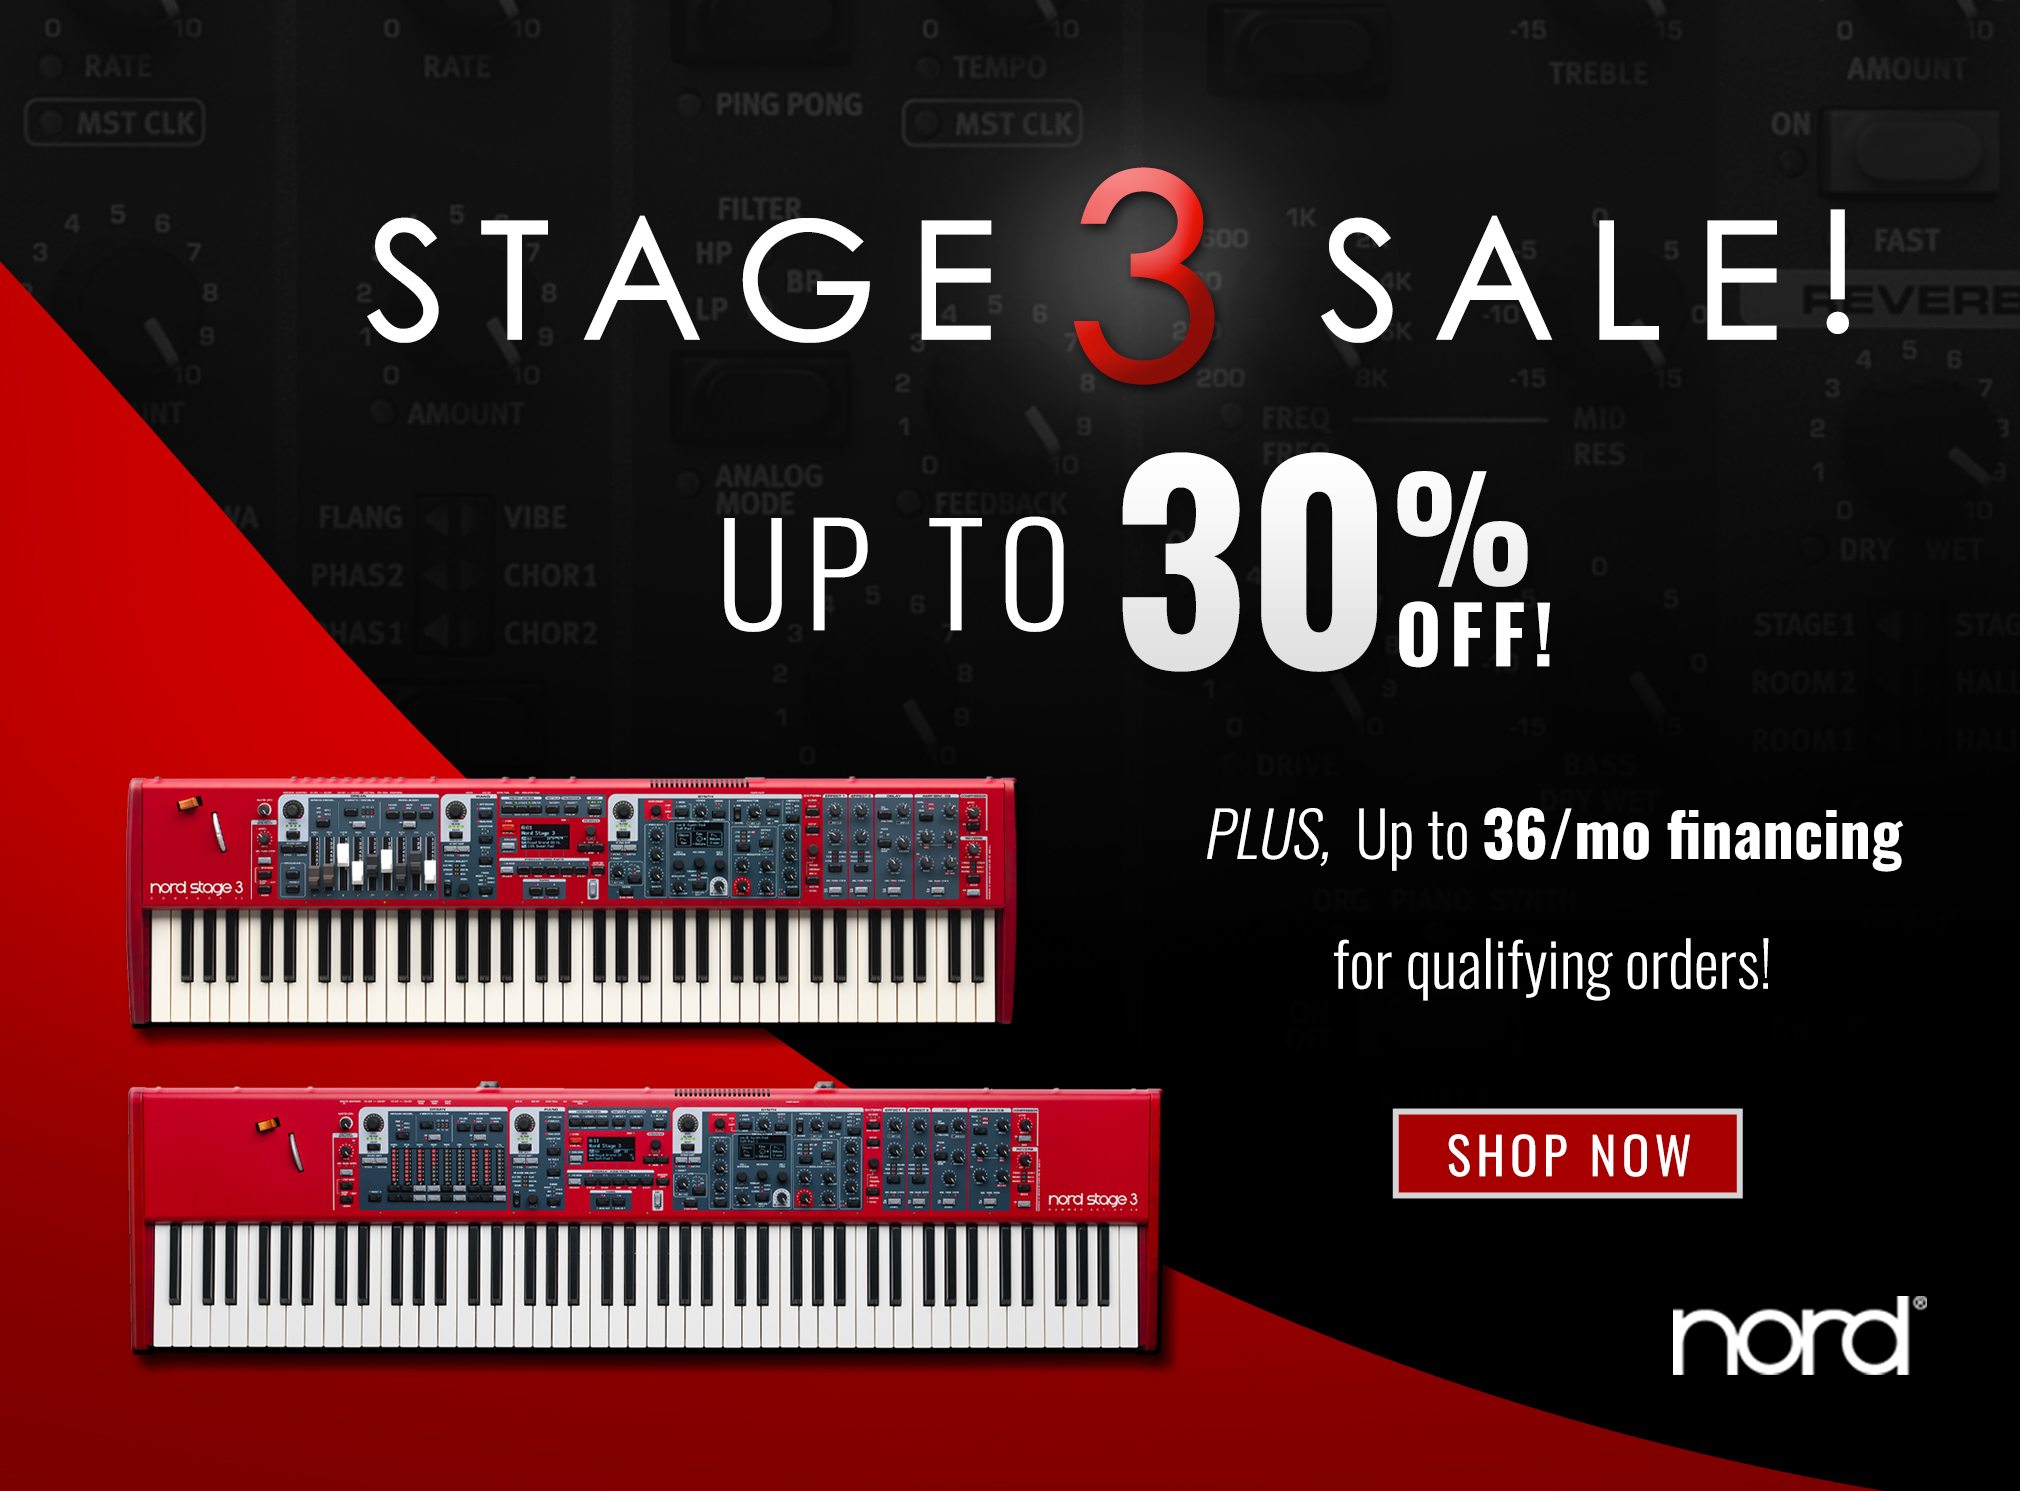 Save Even More On Nord Stage 3 Keyboards!